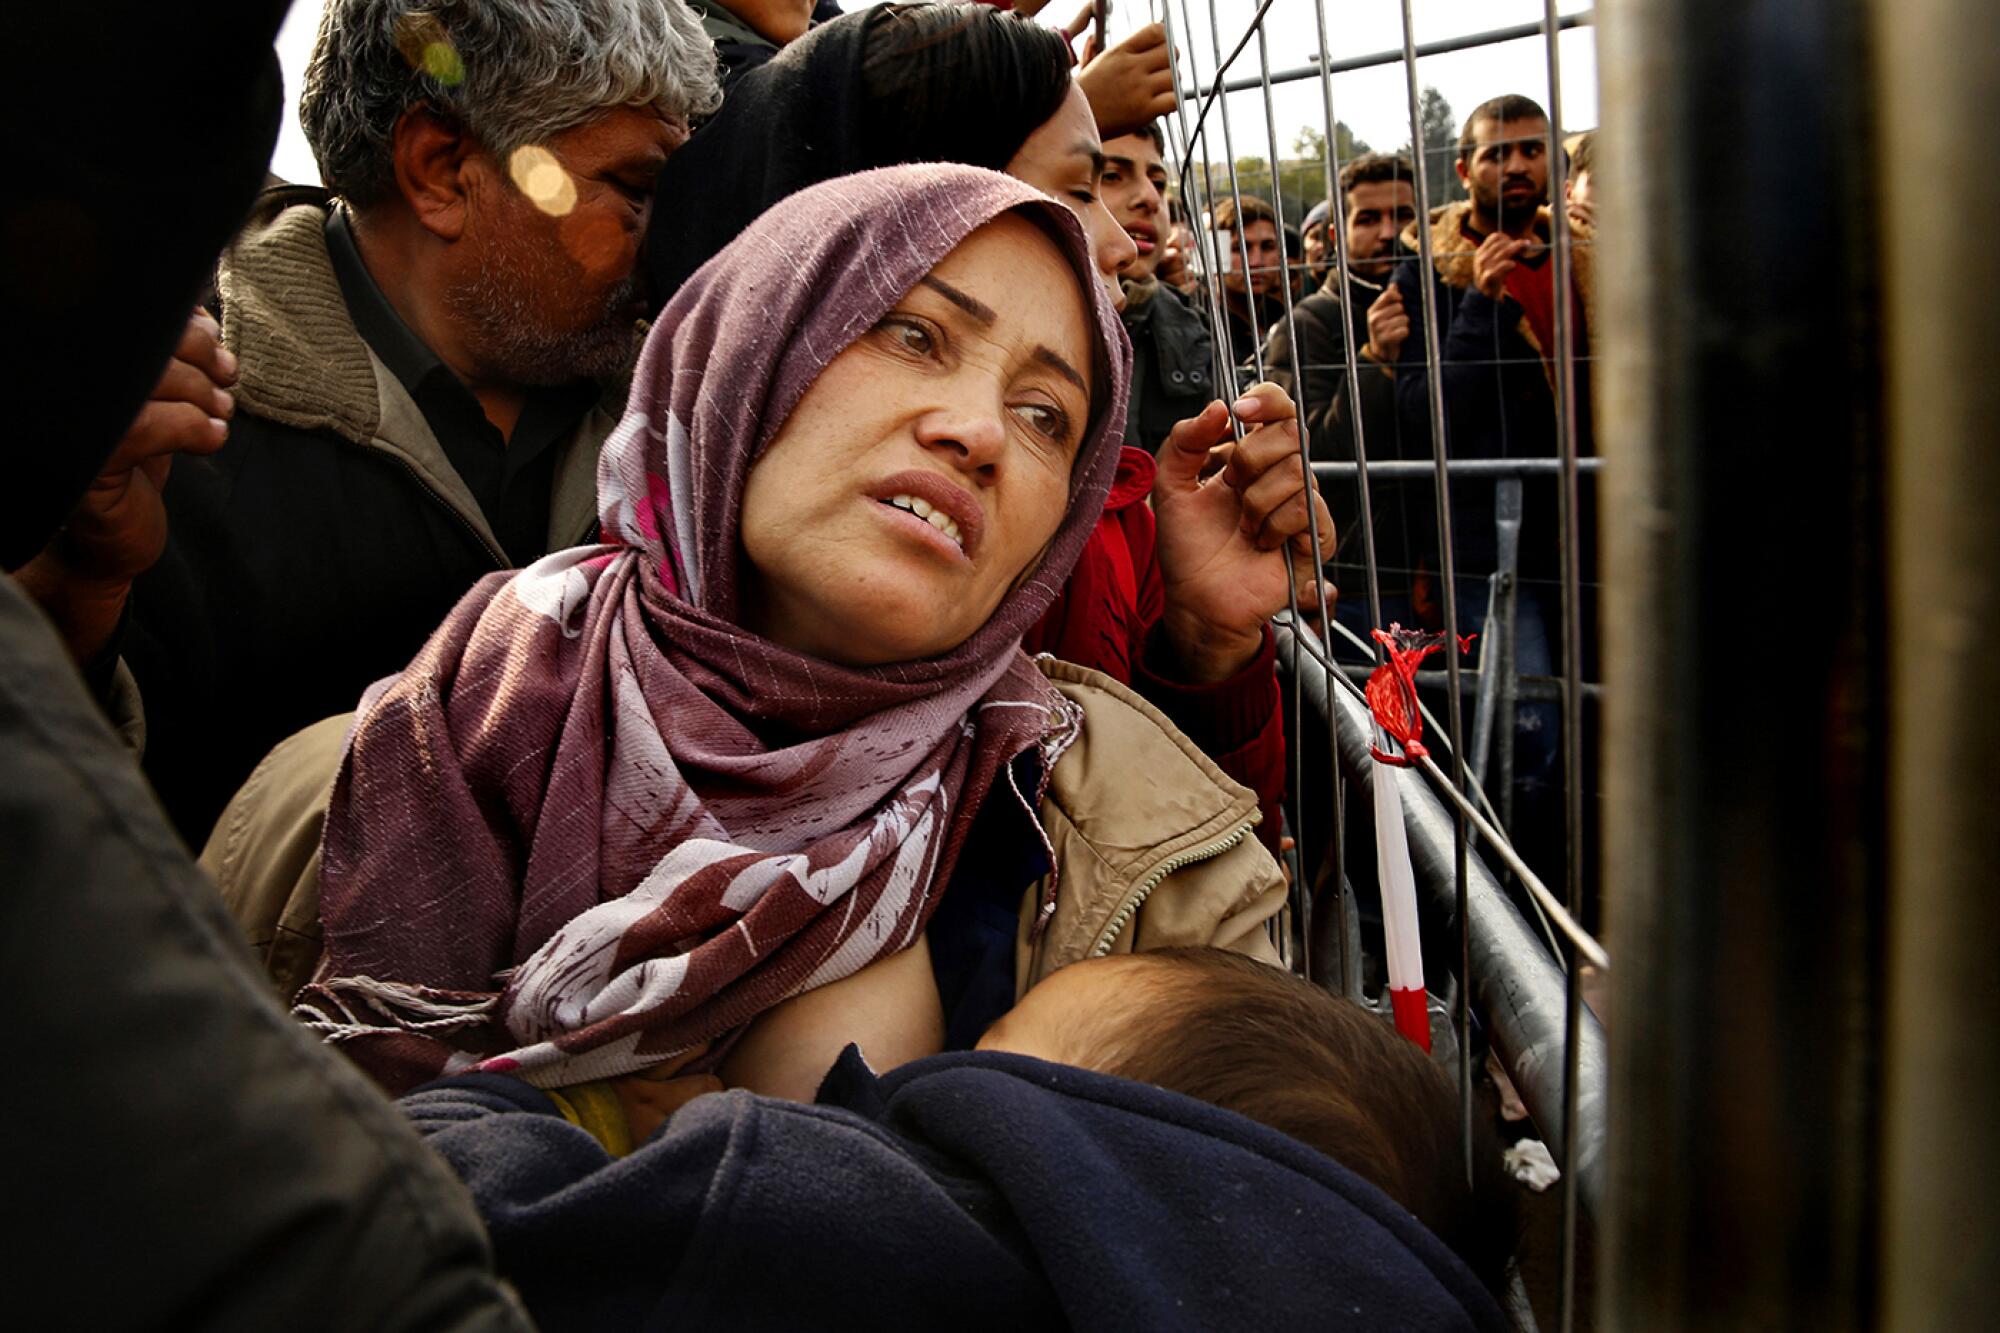 Jamileh Heydari nurses her young son, Matin, in the crush of people against a barricade.